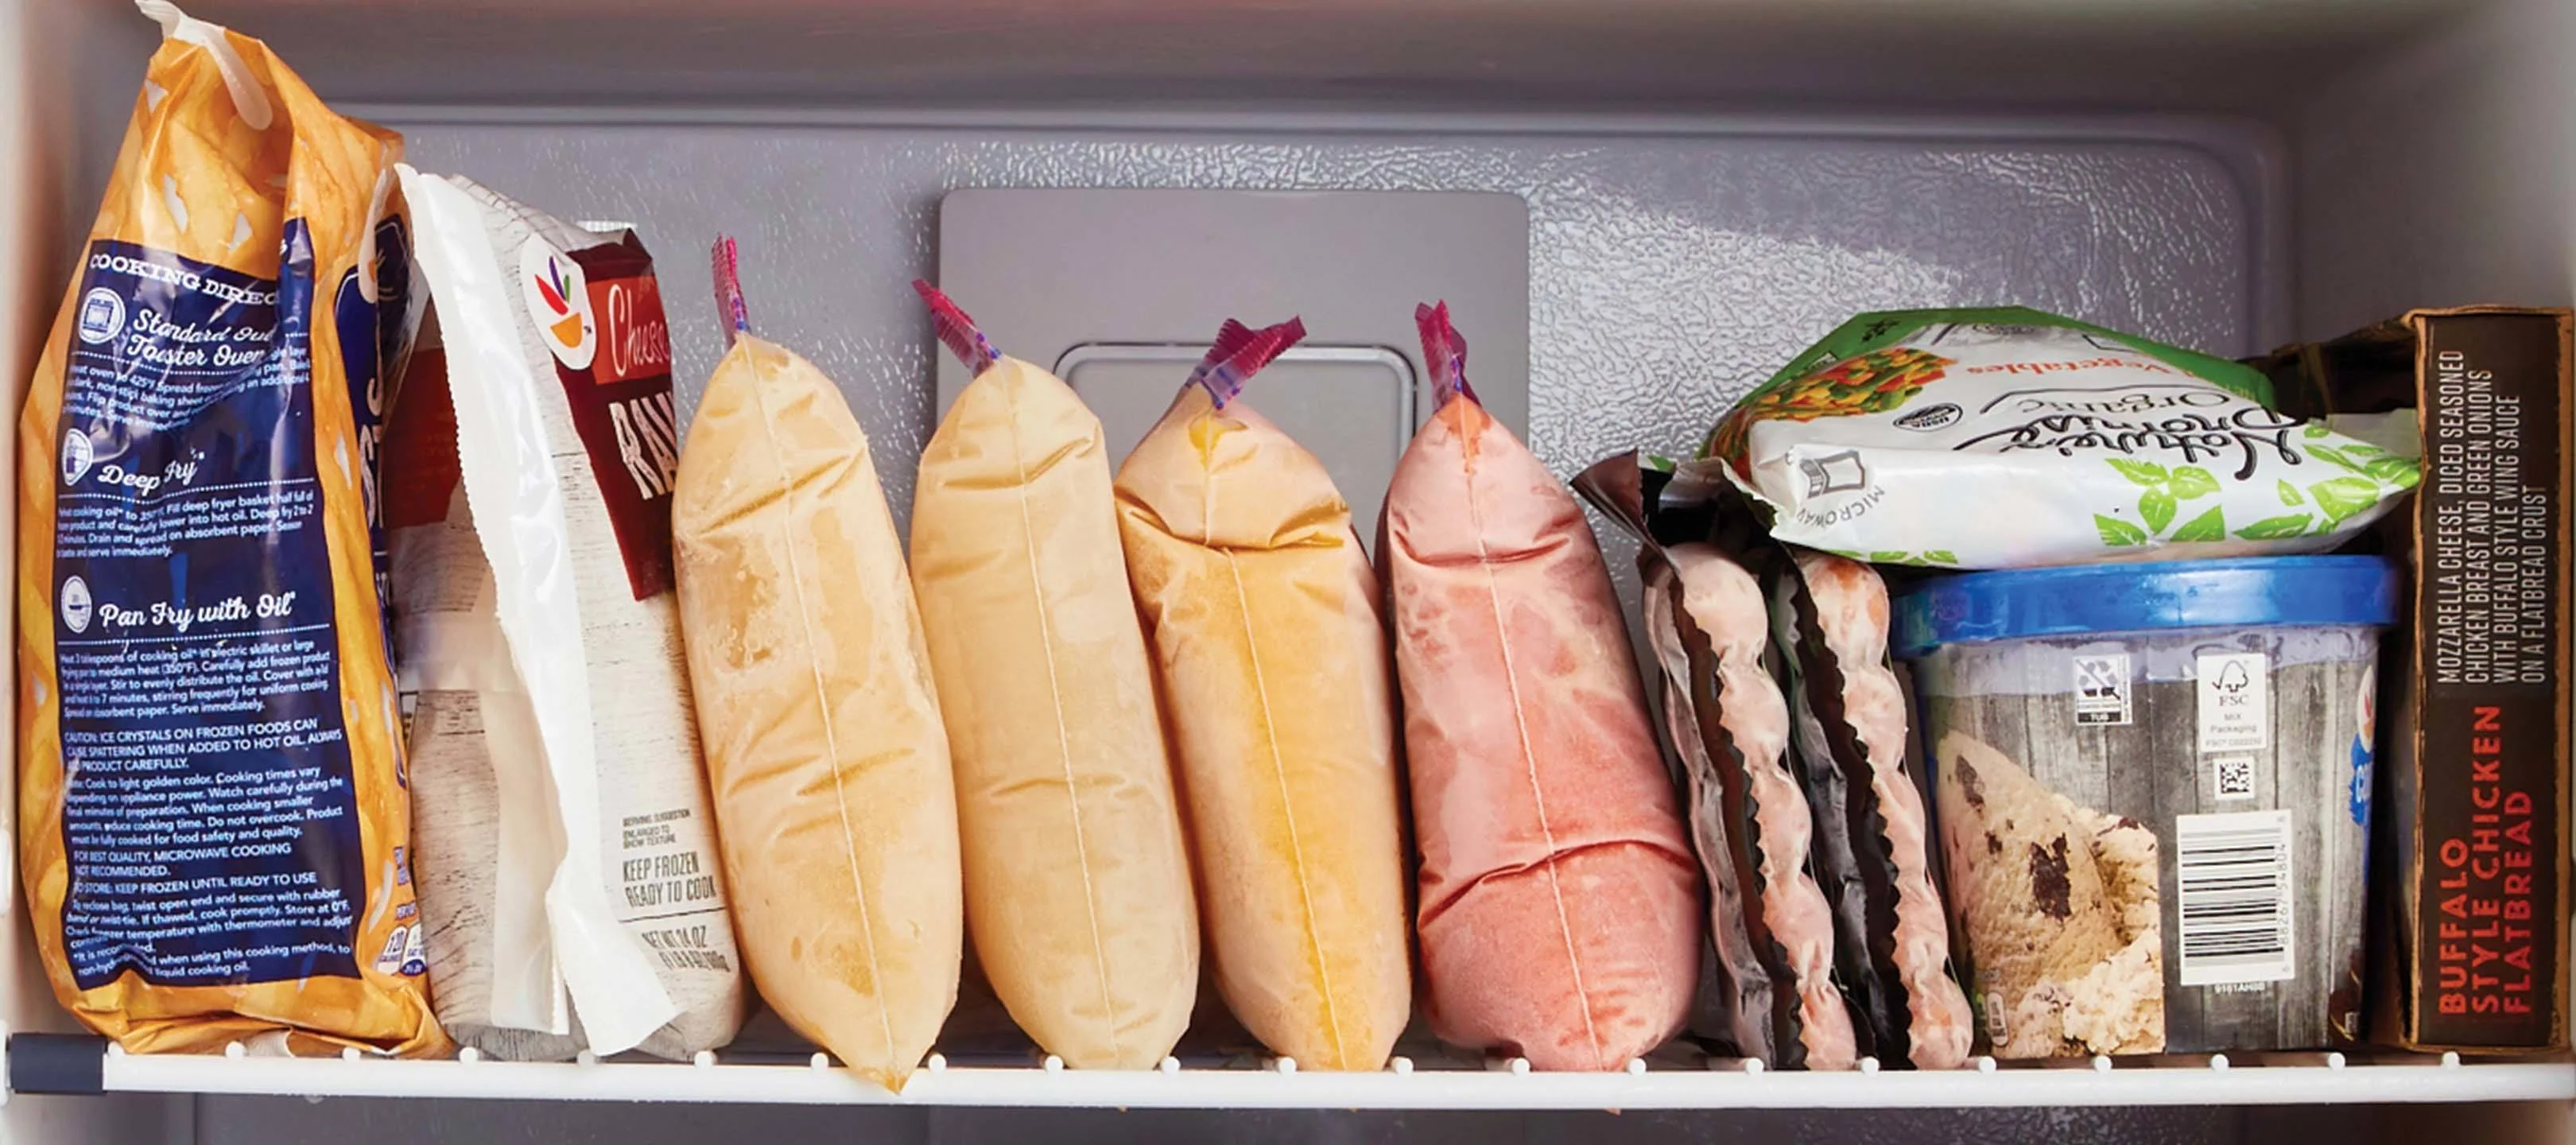 https://www.savoryonline.com/app/uploads/articles/1341/how-to-make-a-freezer-inventory-thats-easy-to-update.jpg